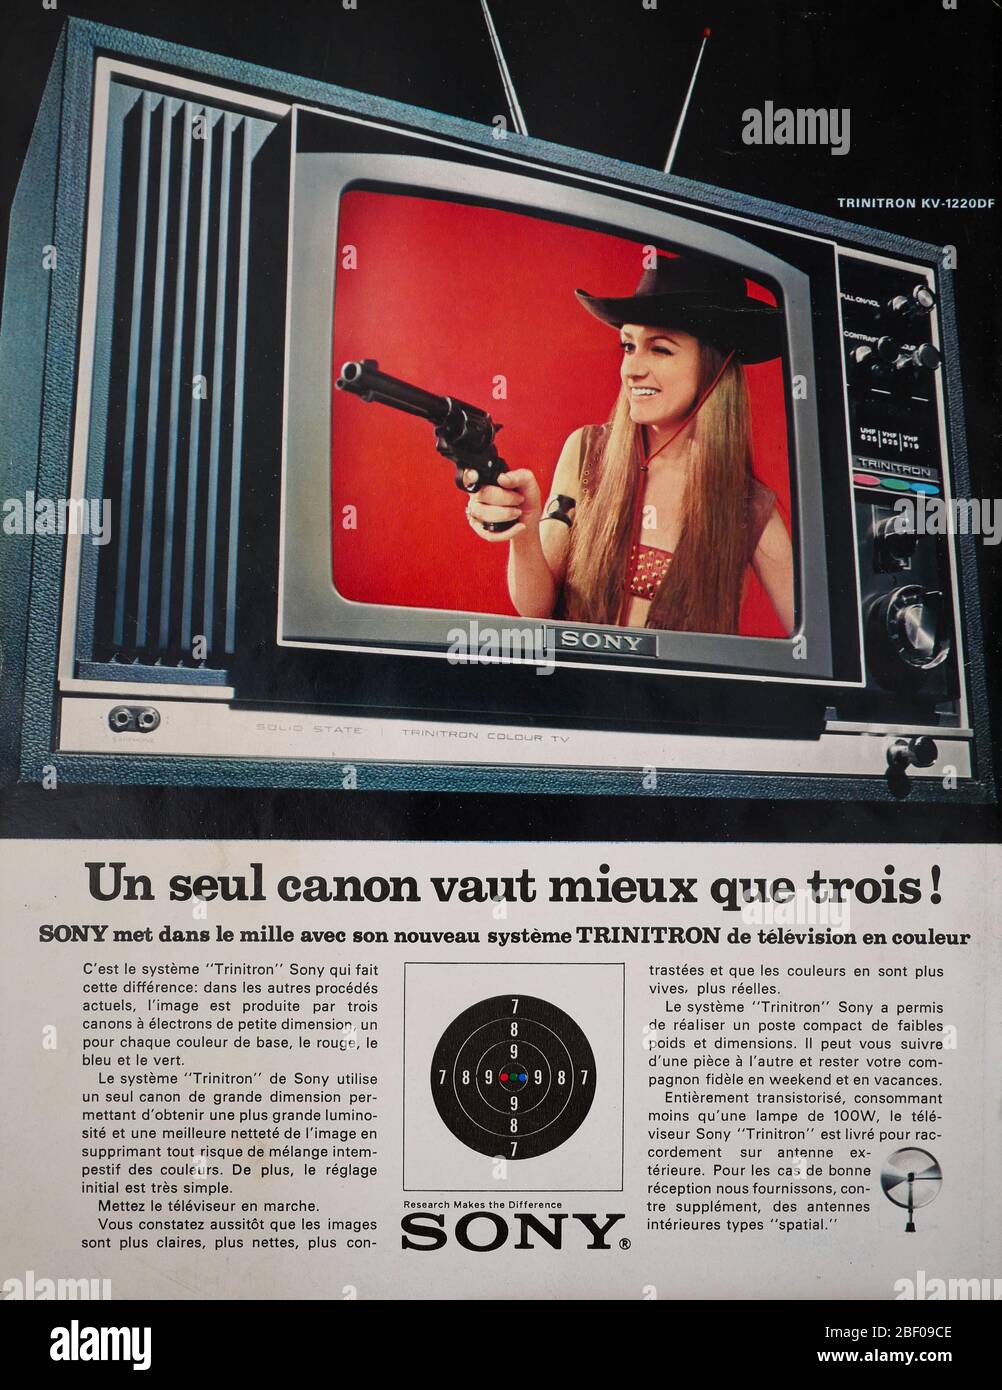 Advertisement page for Sony Trinitron TV set, published on the back cover of the French news and people magazine Paris-Match, 1971, France Stock Photo